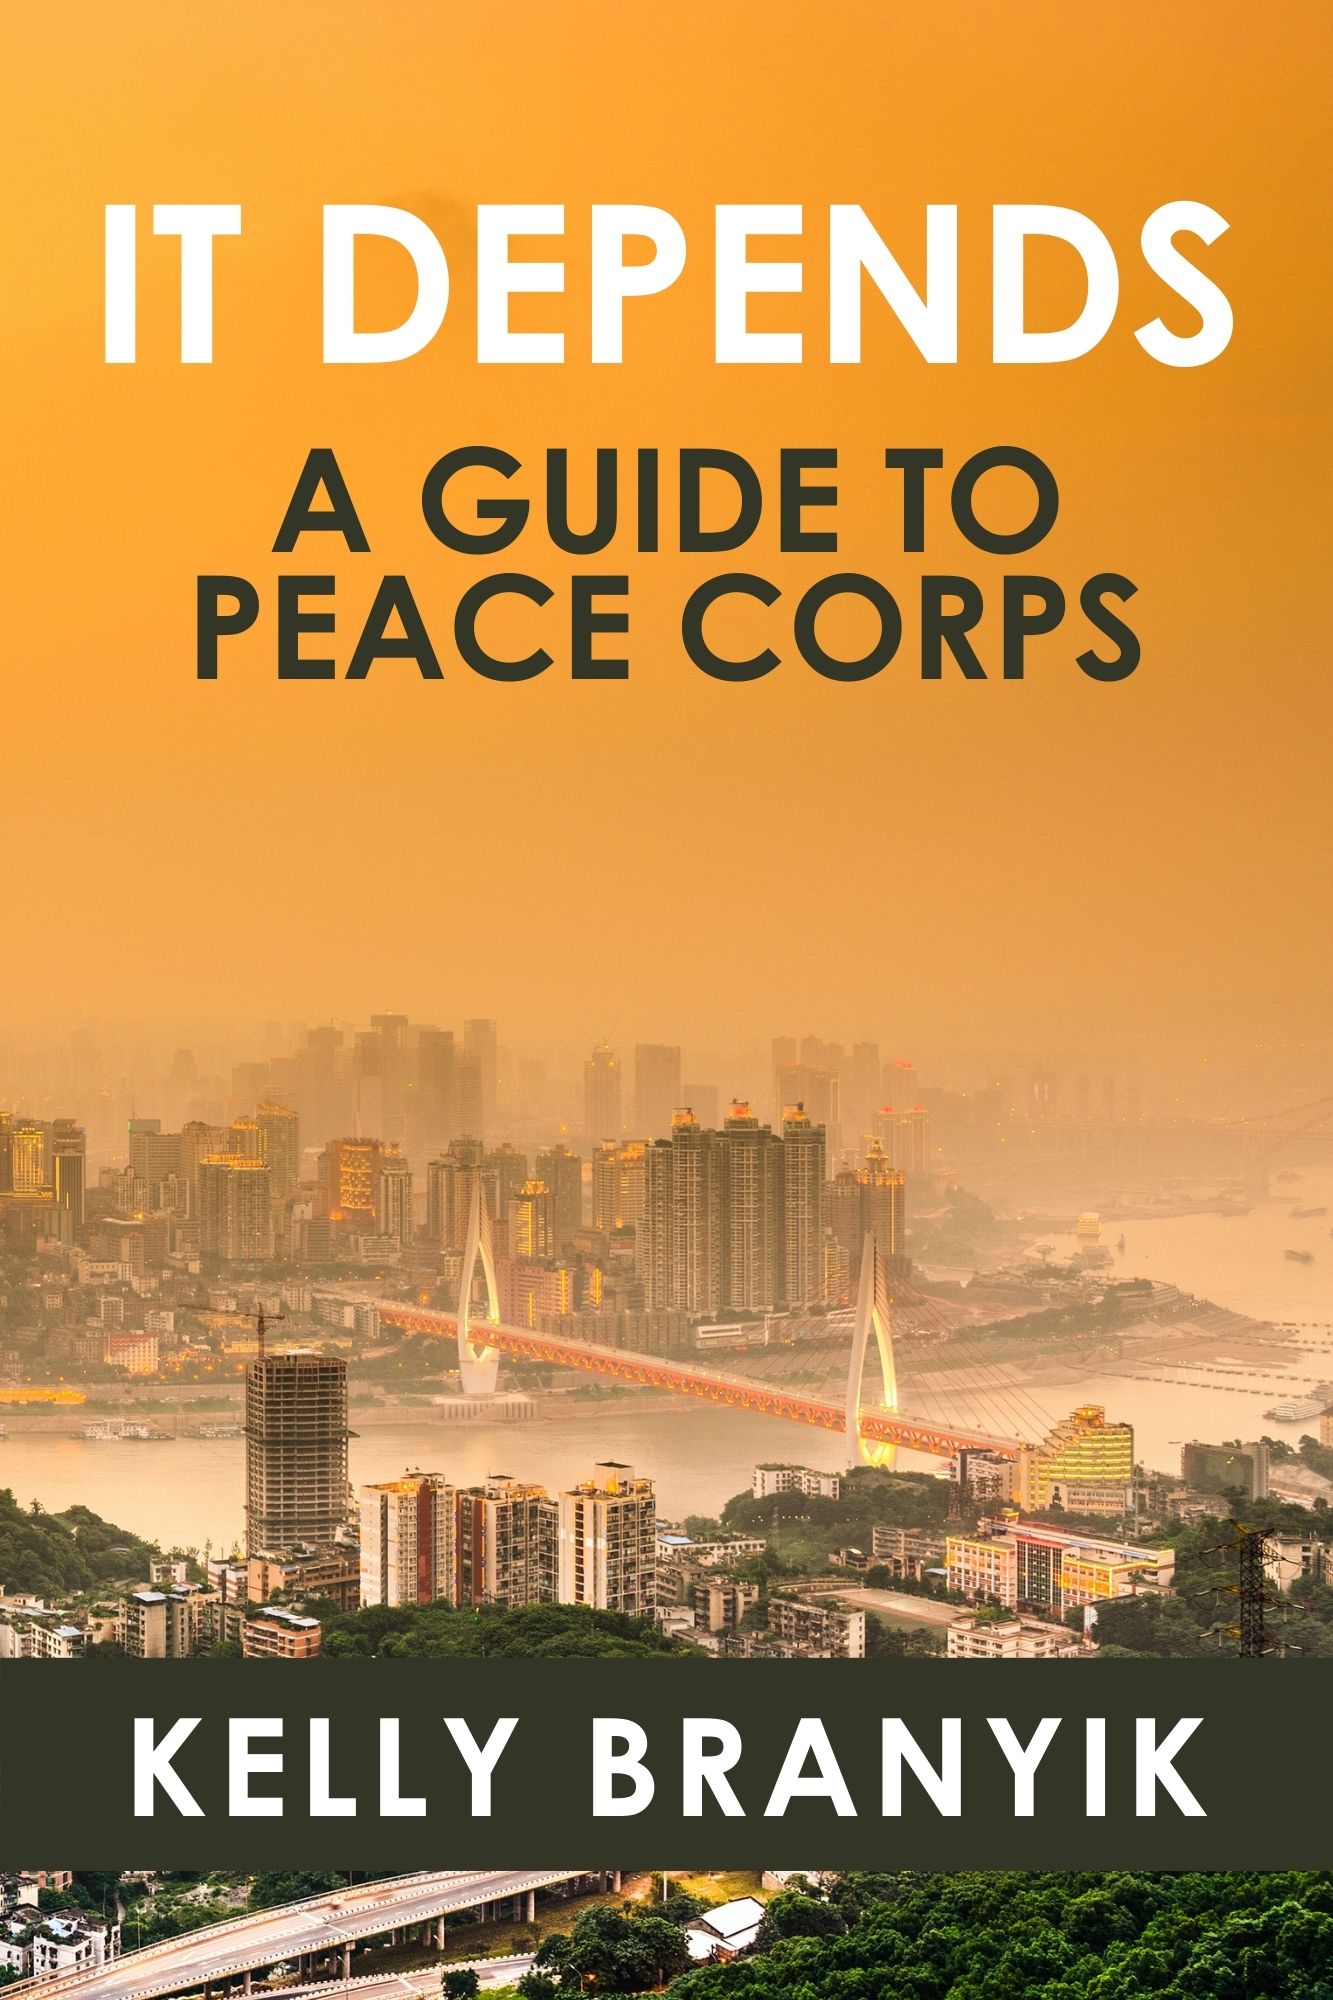 It Depends: A Guide to Peace Corps by Kelly Branyik